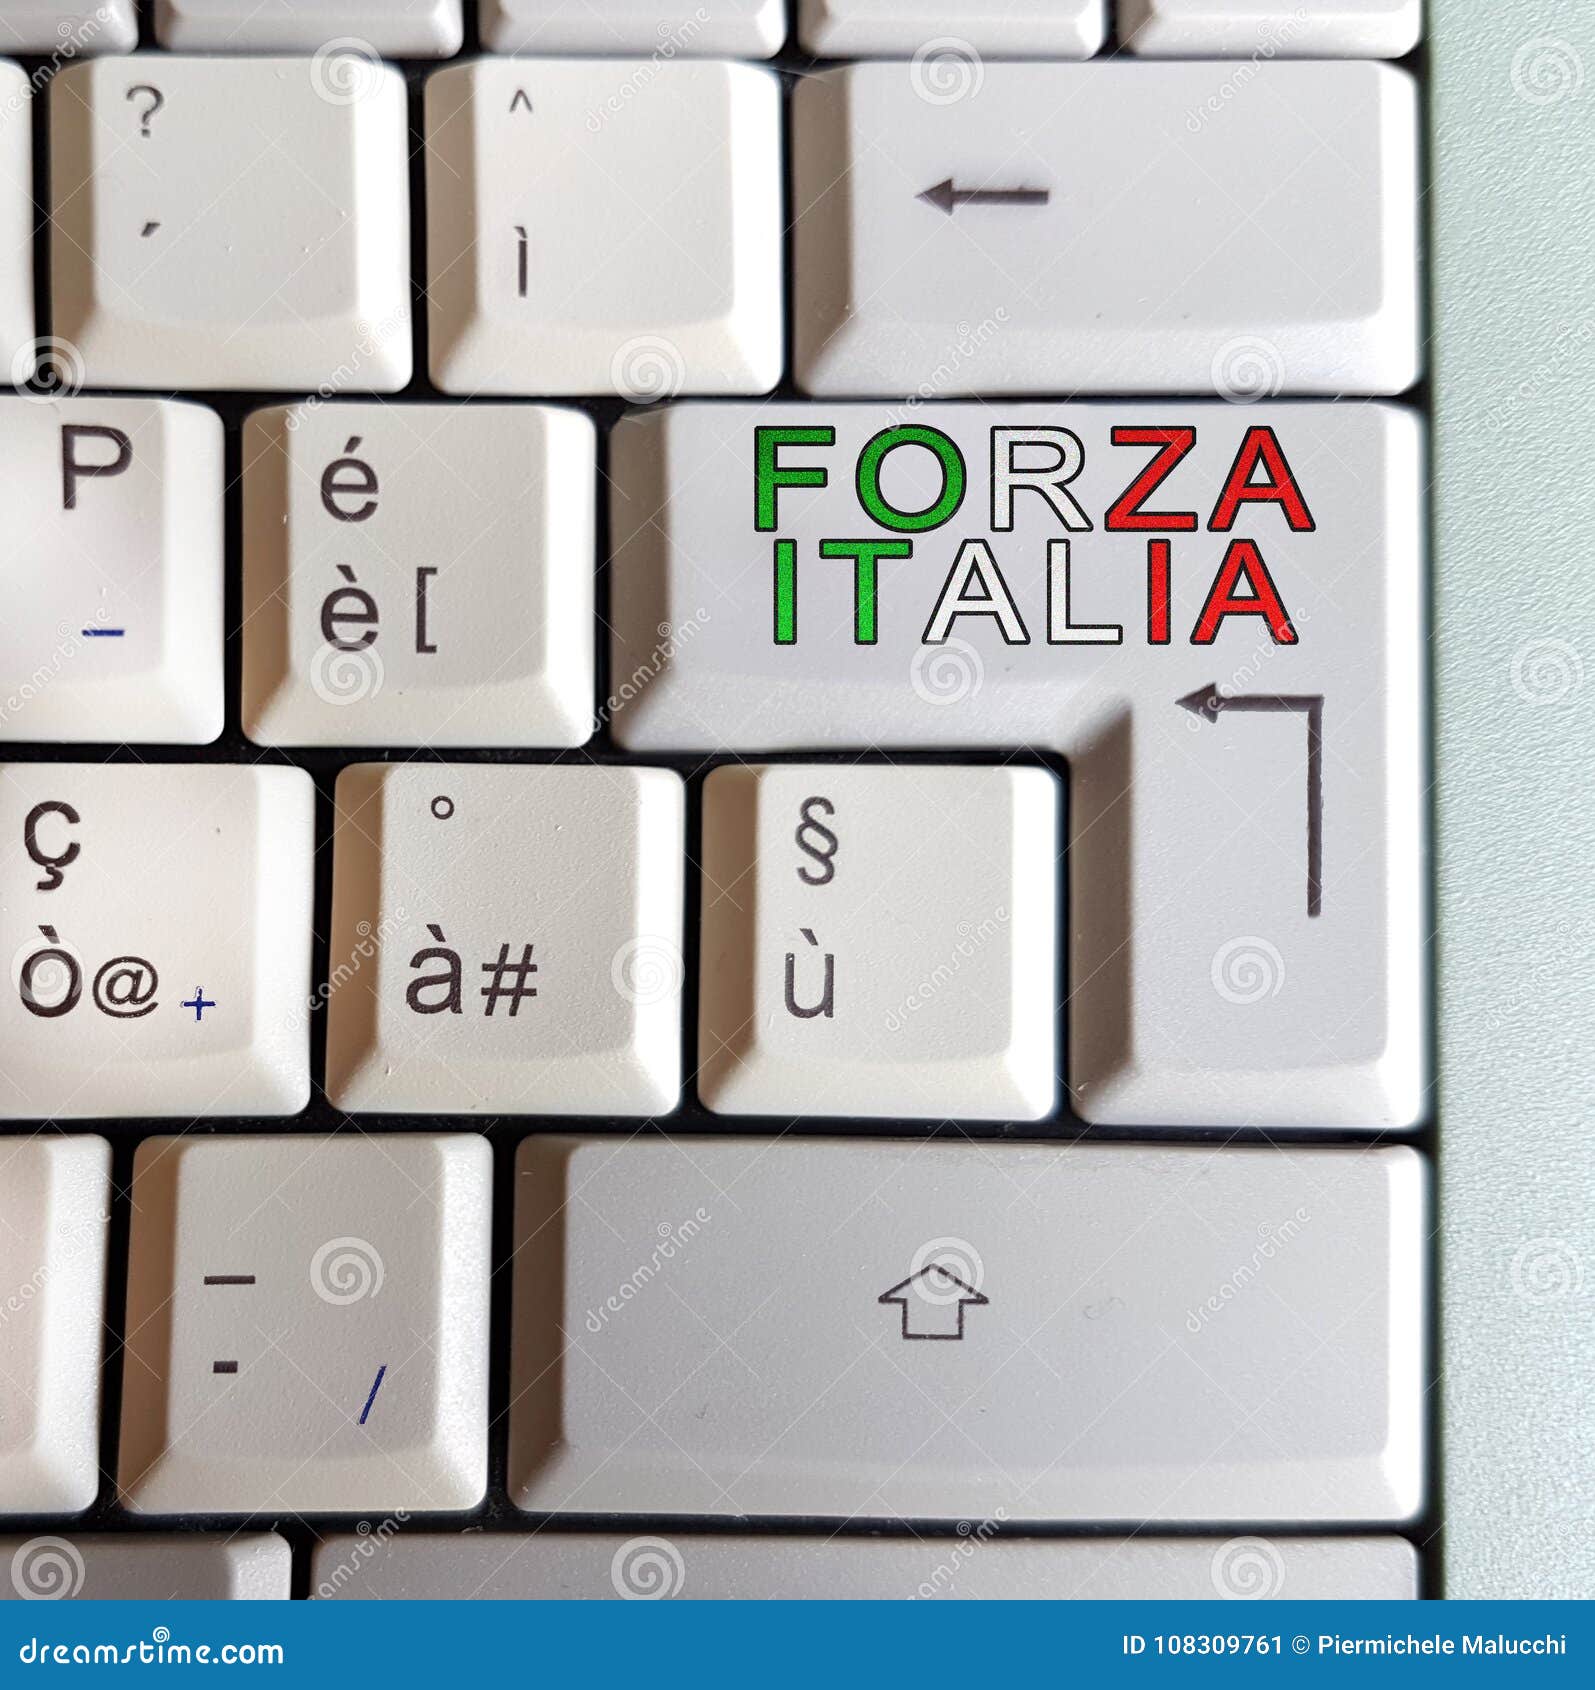 with the keyboard vote for the next elections in italy, vote for